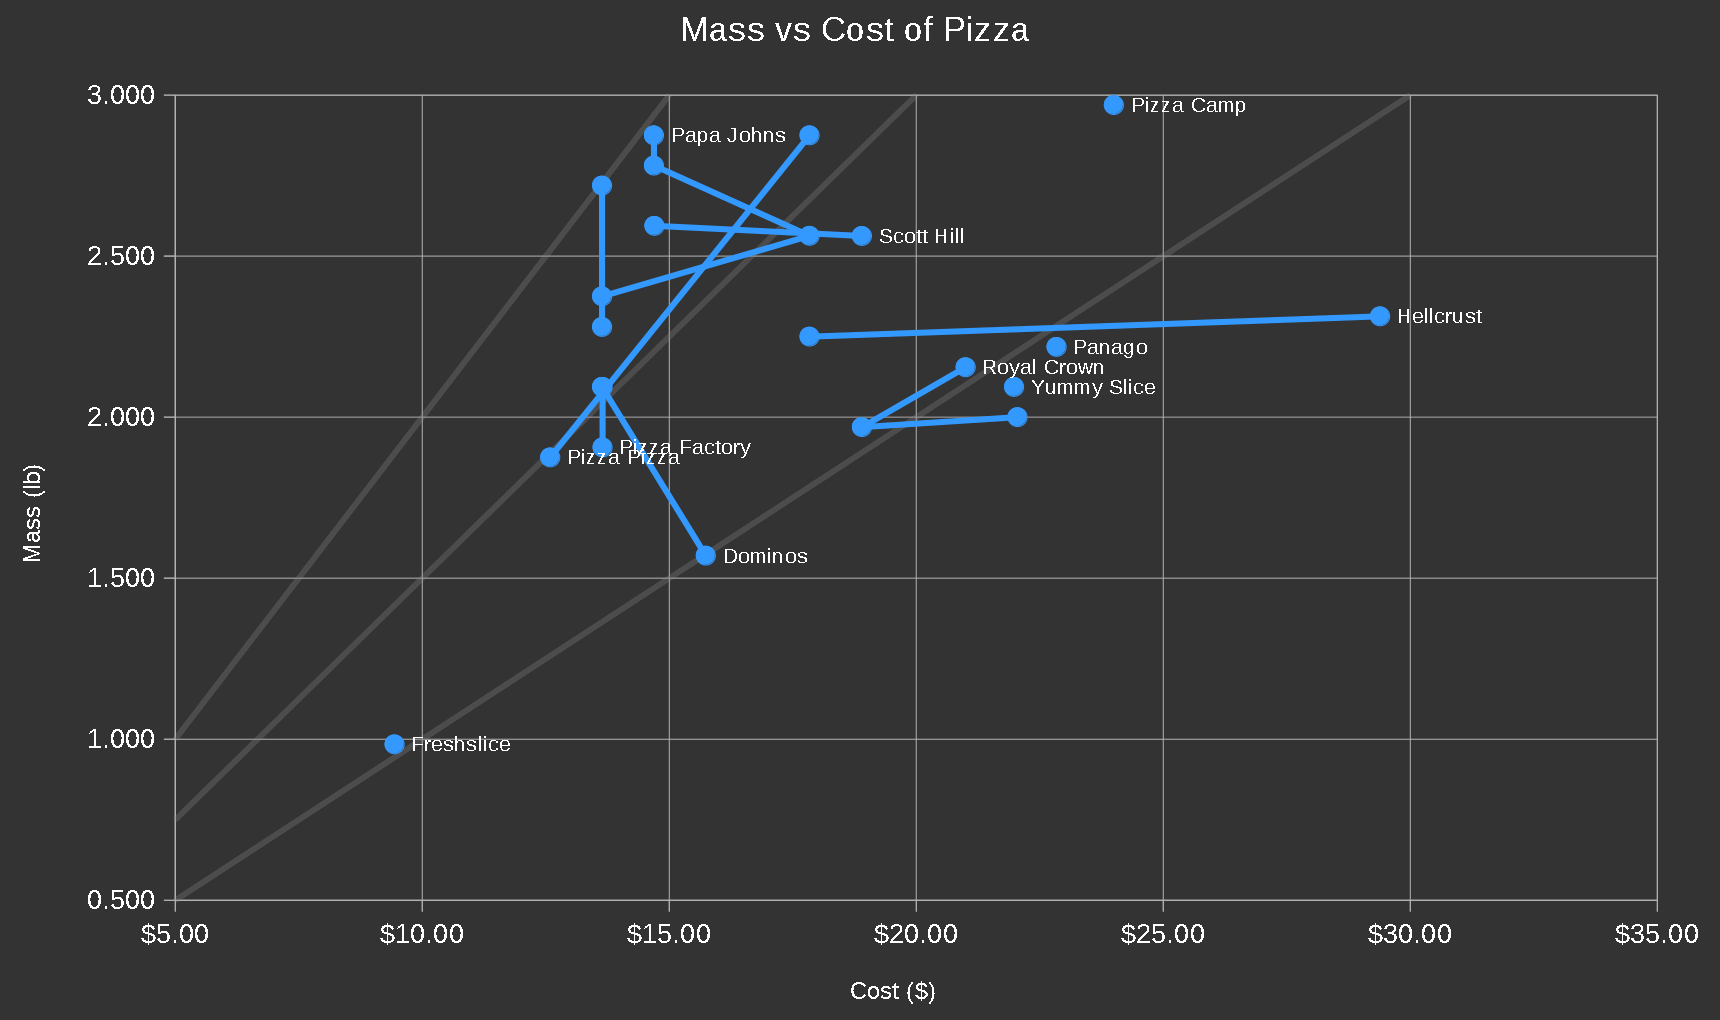 Chart showing Mass vs Cost of Pizza